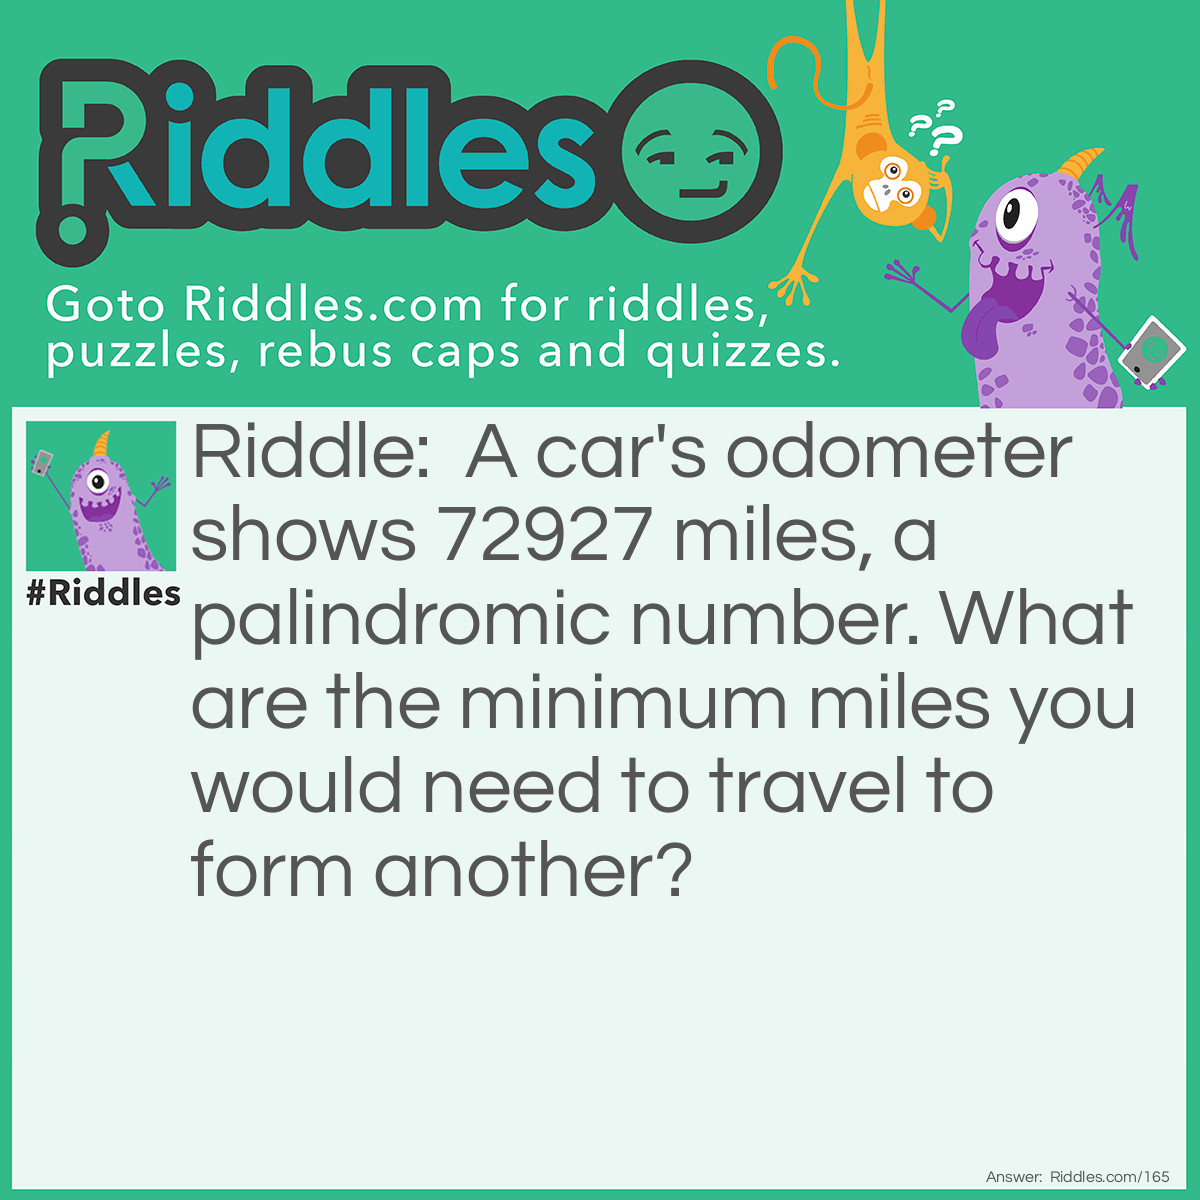 Riddle: A car's odometer shows 72927 miles, a palindromic number. What are the minimum miles you would need to travel to form another? Answer: 110 miles. (73037)